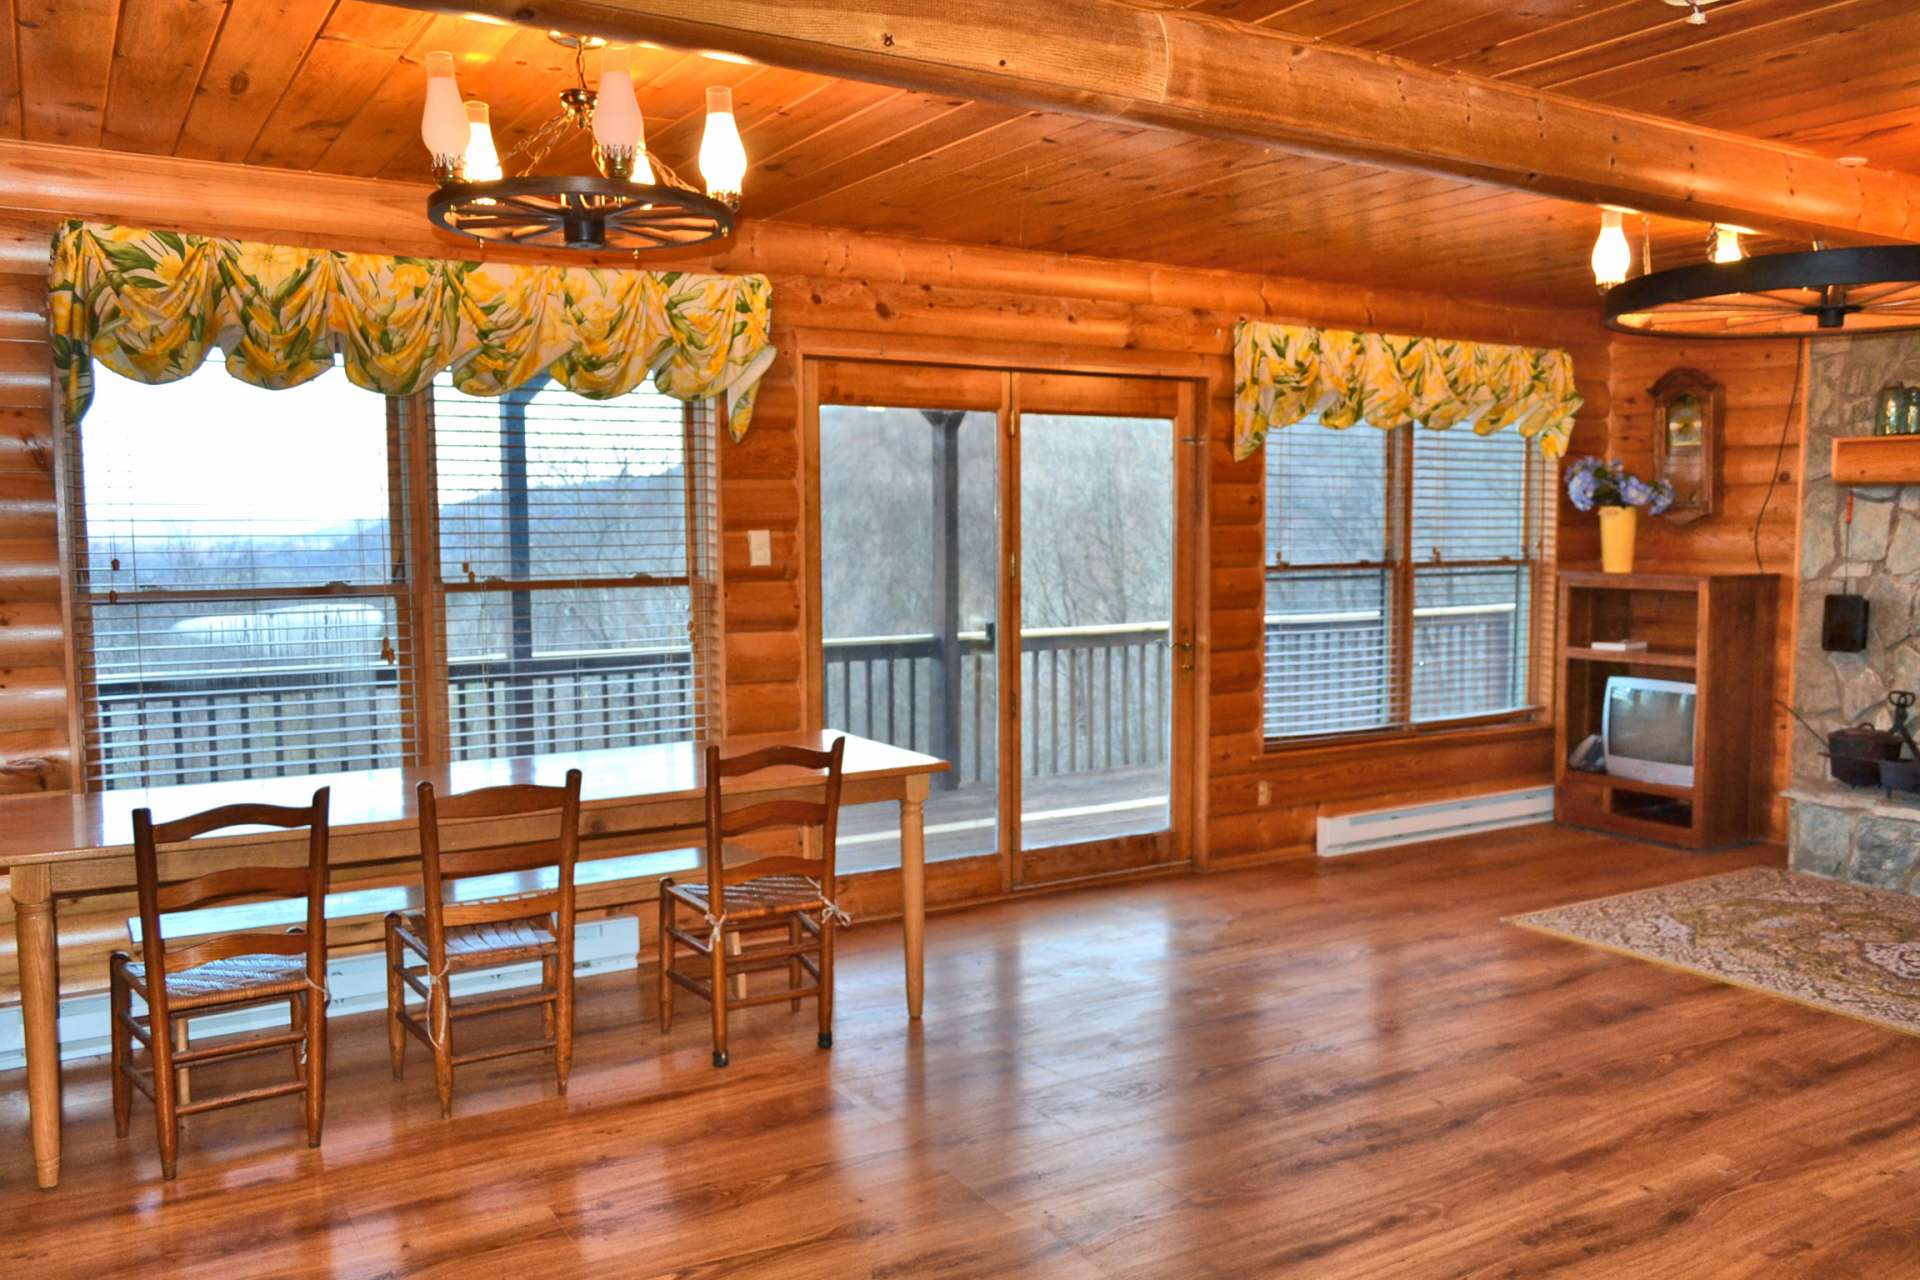 Enjoy the views through all four seasons in the great room. Notice the dining area has direct views when dining inside.